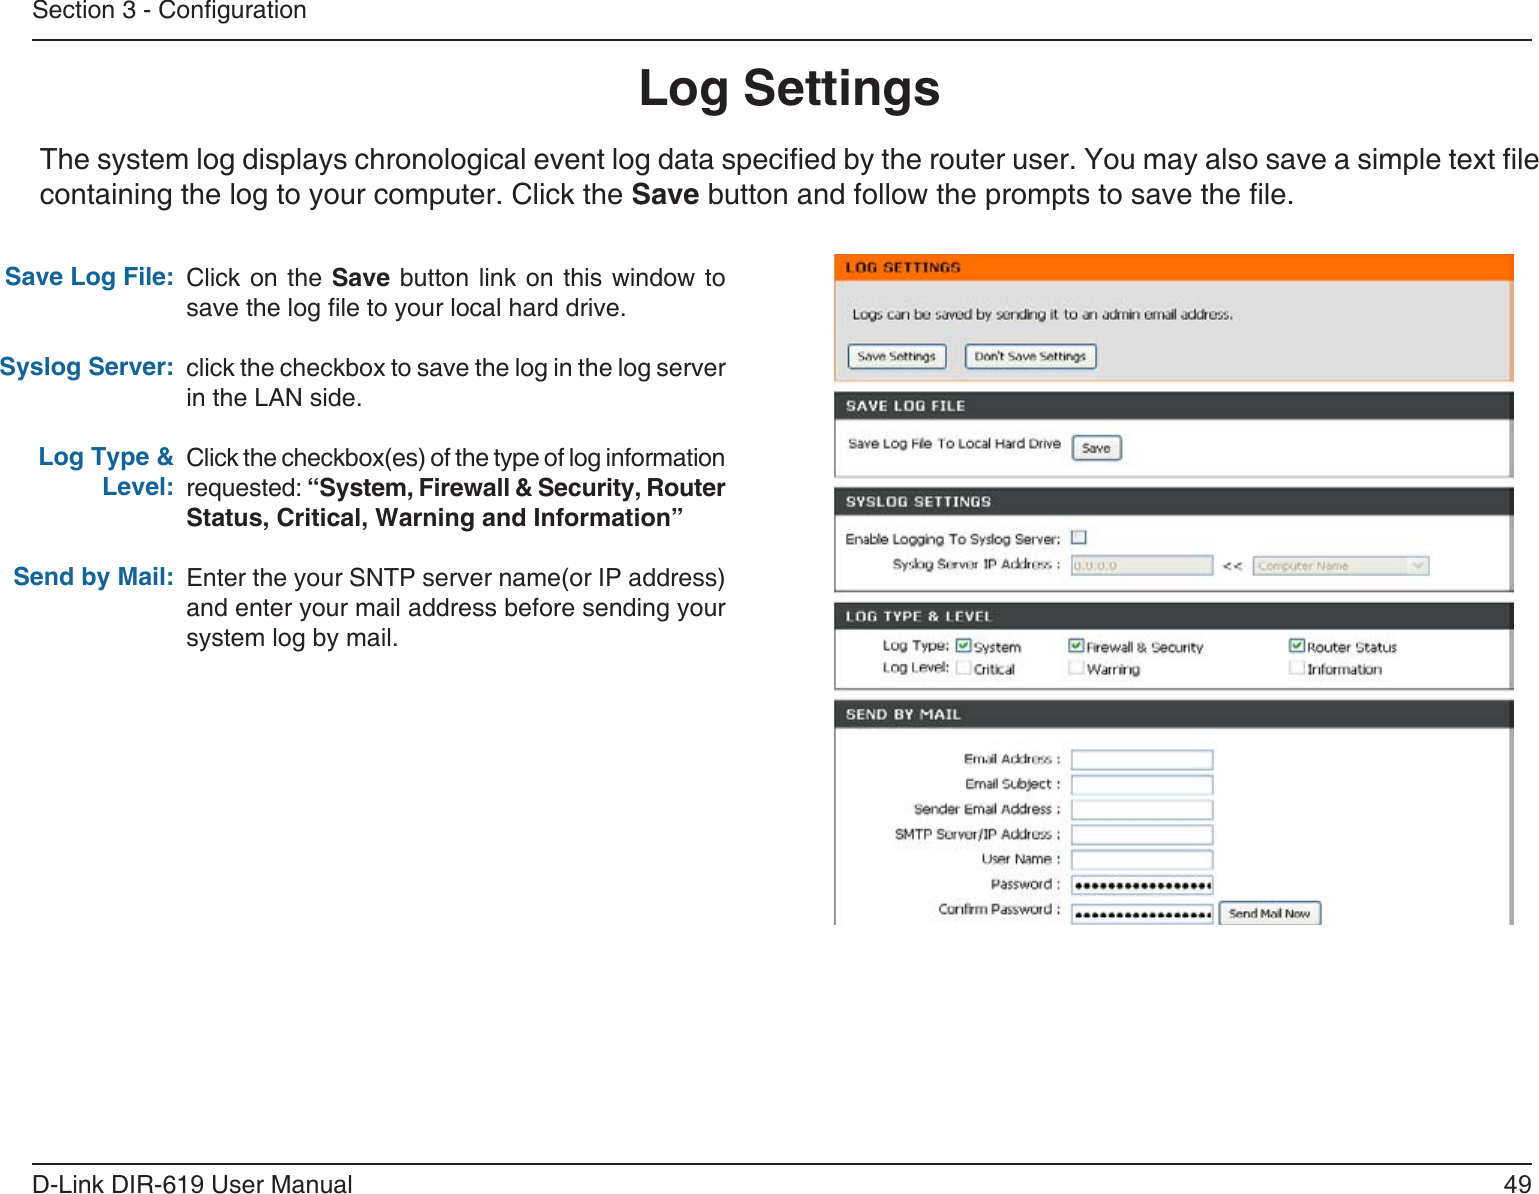 49D-Link DIR-619 User ManualSection 3 - CongurationLog SettingsClick on the  Save button link  on this window  tosave the log le to your local hard drive.click the checkbox to save the log in the log server in the LAN side.Click the checkbox(es) of the type of log information requested: “System, Firewall &amp; Security, Router Status, Critical, Warning and Information”Enter the your SNTP server name(or IP address)and enter your mail address before sending yoursystem log by mail.Save Log File:Syslog Server:Log Type &amp; Level:Send by Mail:The system log displays chronological event log data specied by the router user. You may also save a simple text le containing the log to your computer. Click the Save button and follow the prompts to save the le.